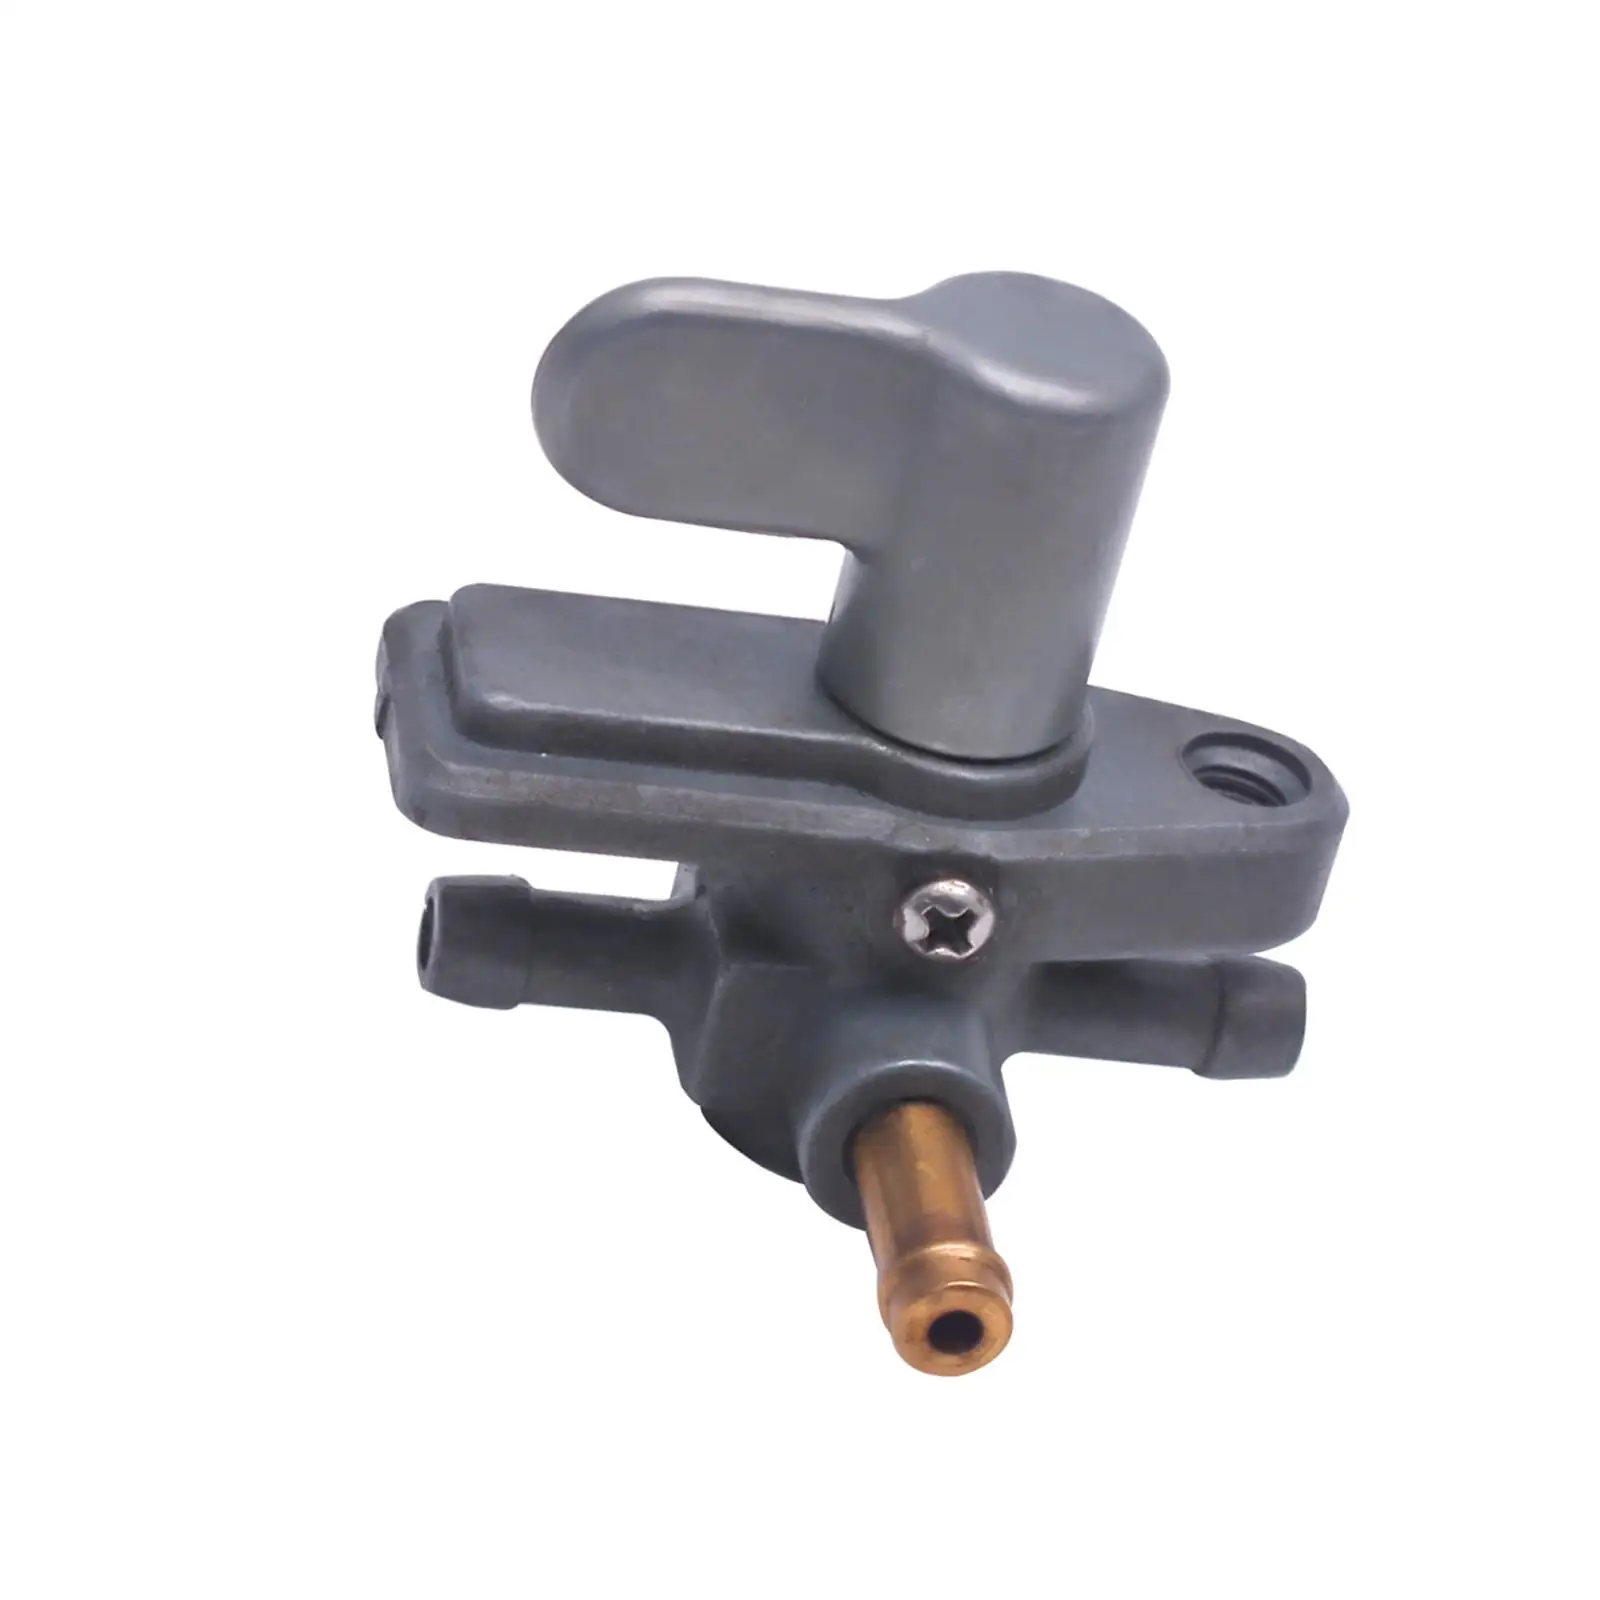 Fuel Cock Assy Switch Replace for Yamaha F4 4HP Outboard Motors Durable Outboard Engines Parts Convenient Installation